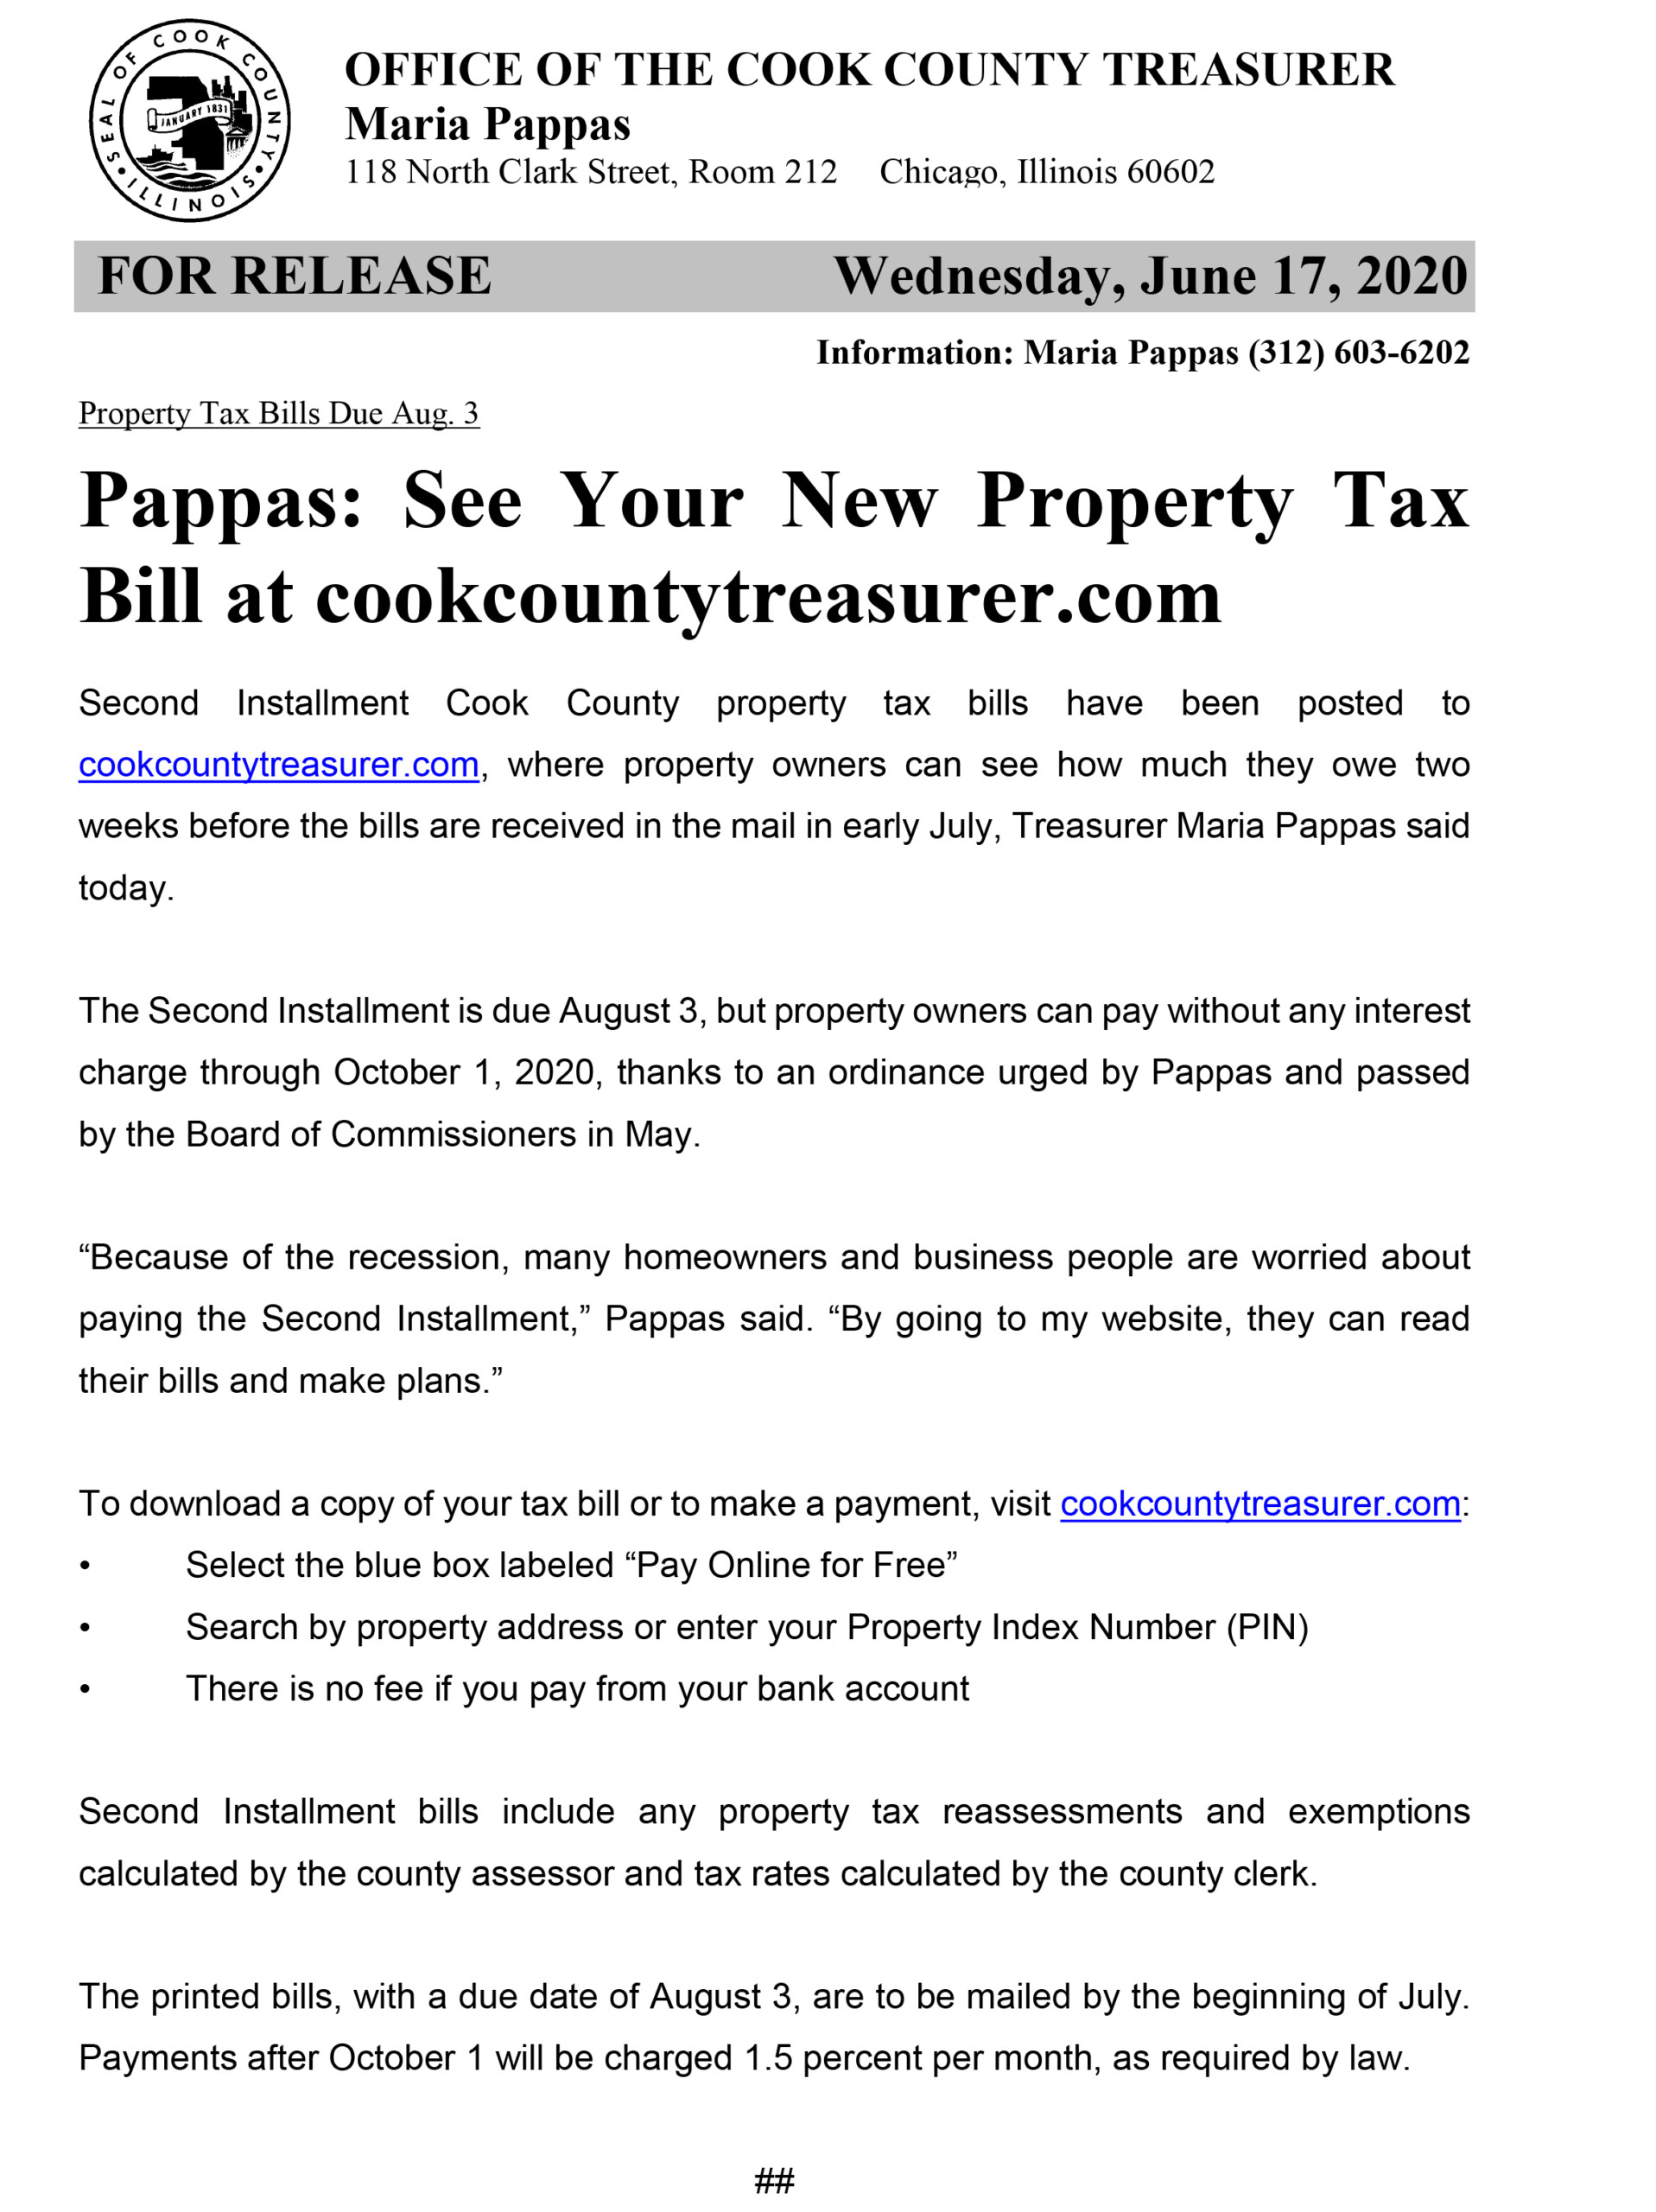 Pappas See Your New Property Tax Bill at